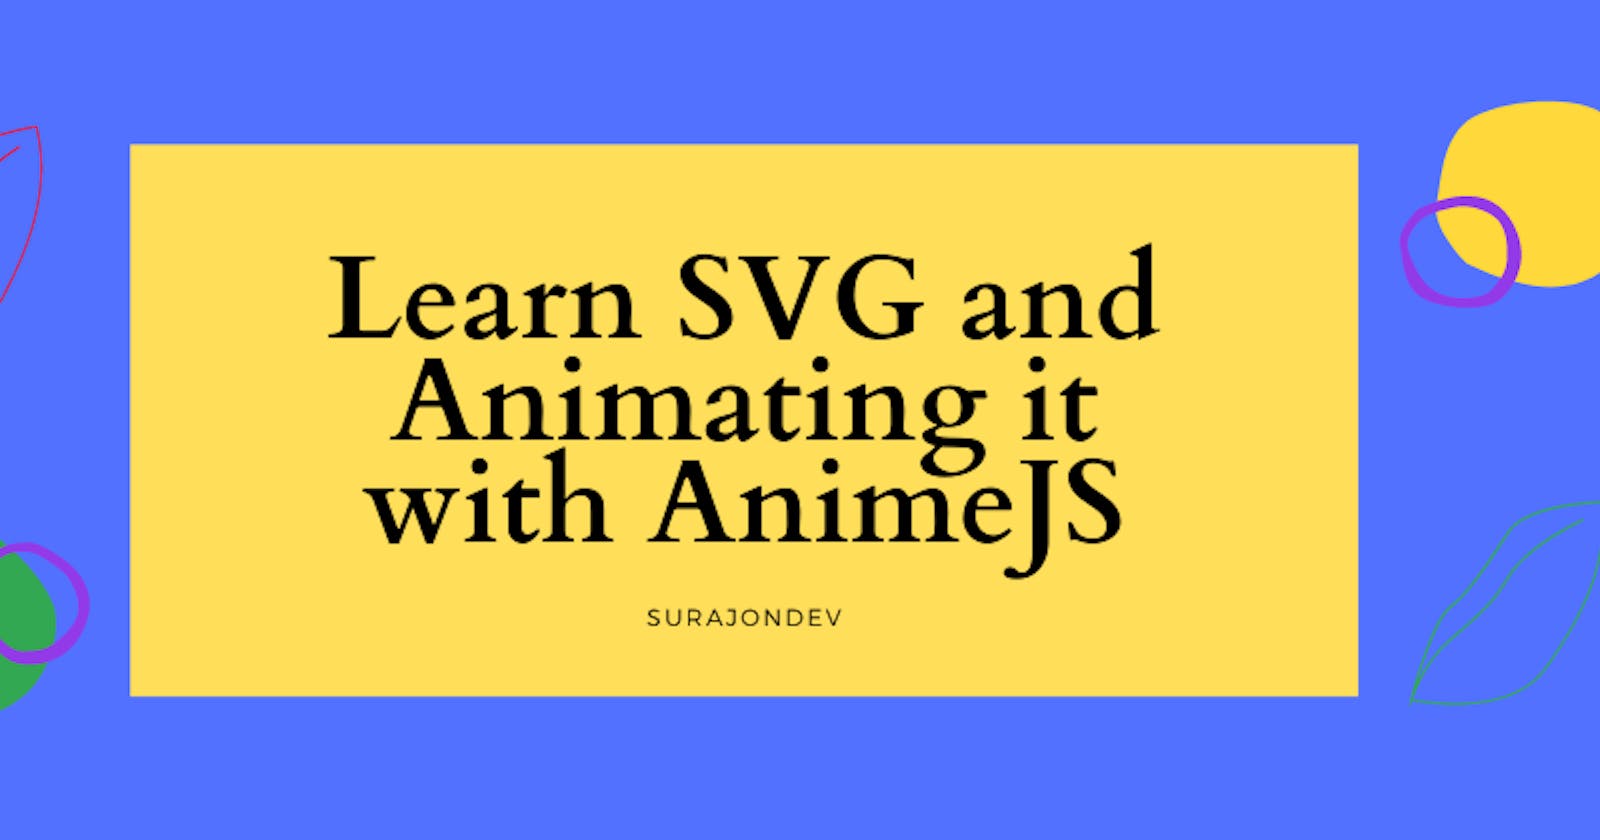 Create and Animate SVG with Anime.js